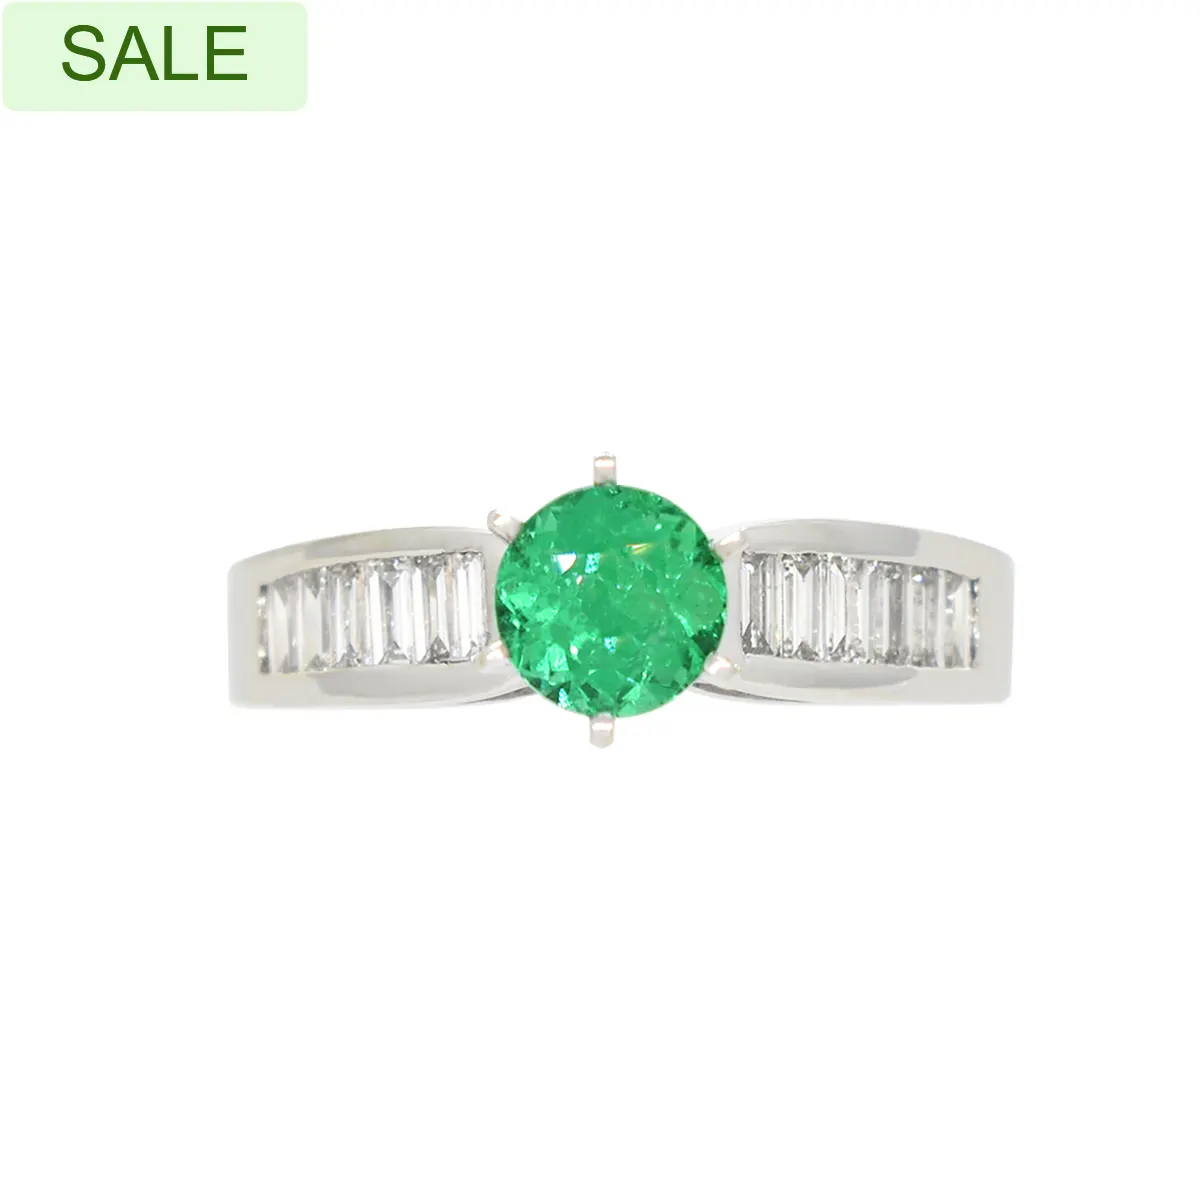 White Gold Emerald Engagement Ring With Round Natural Emerald and Baguette Cut Diamonds